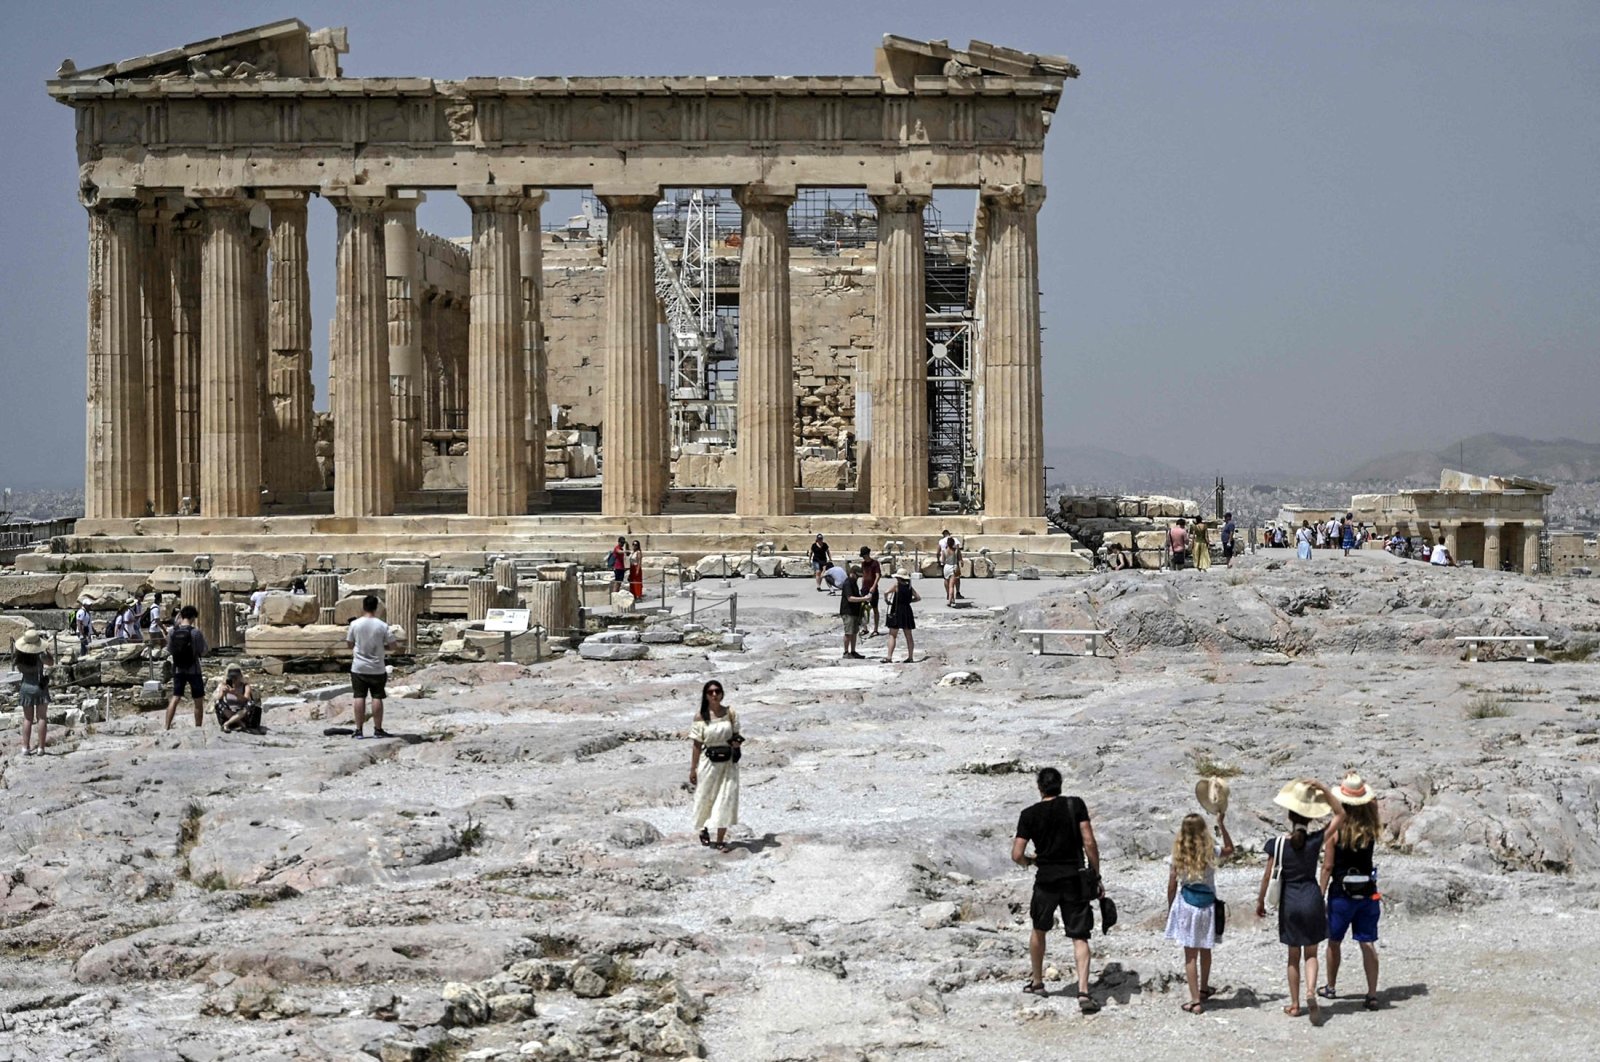 Visitors walk in front of the Parthenon Temple in Athens, Greece, April 6, 2022. (AFP Photo)